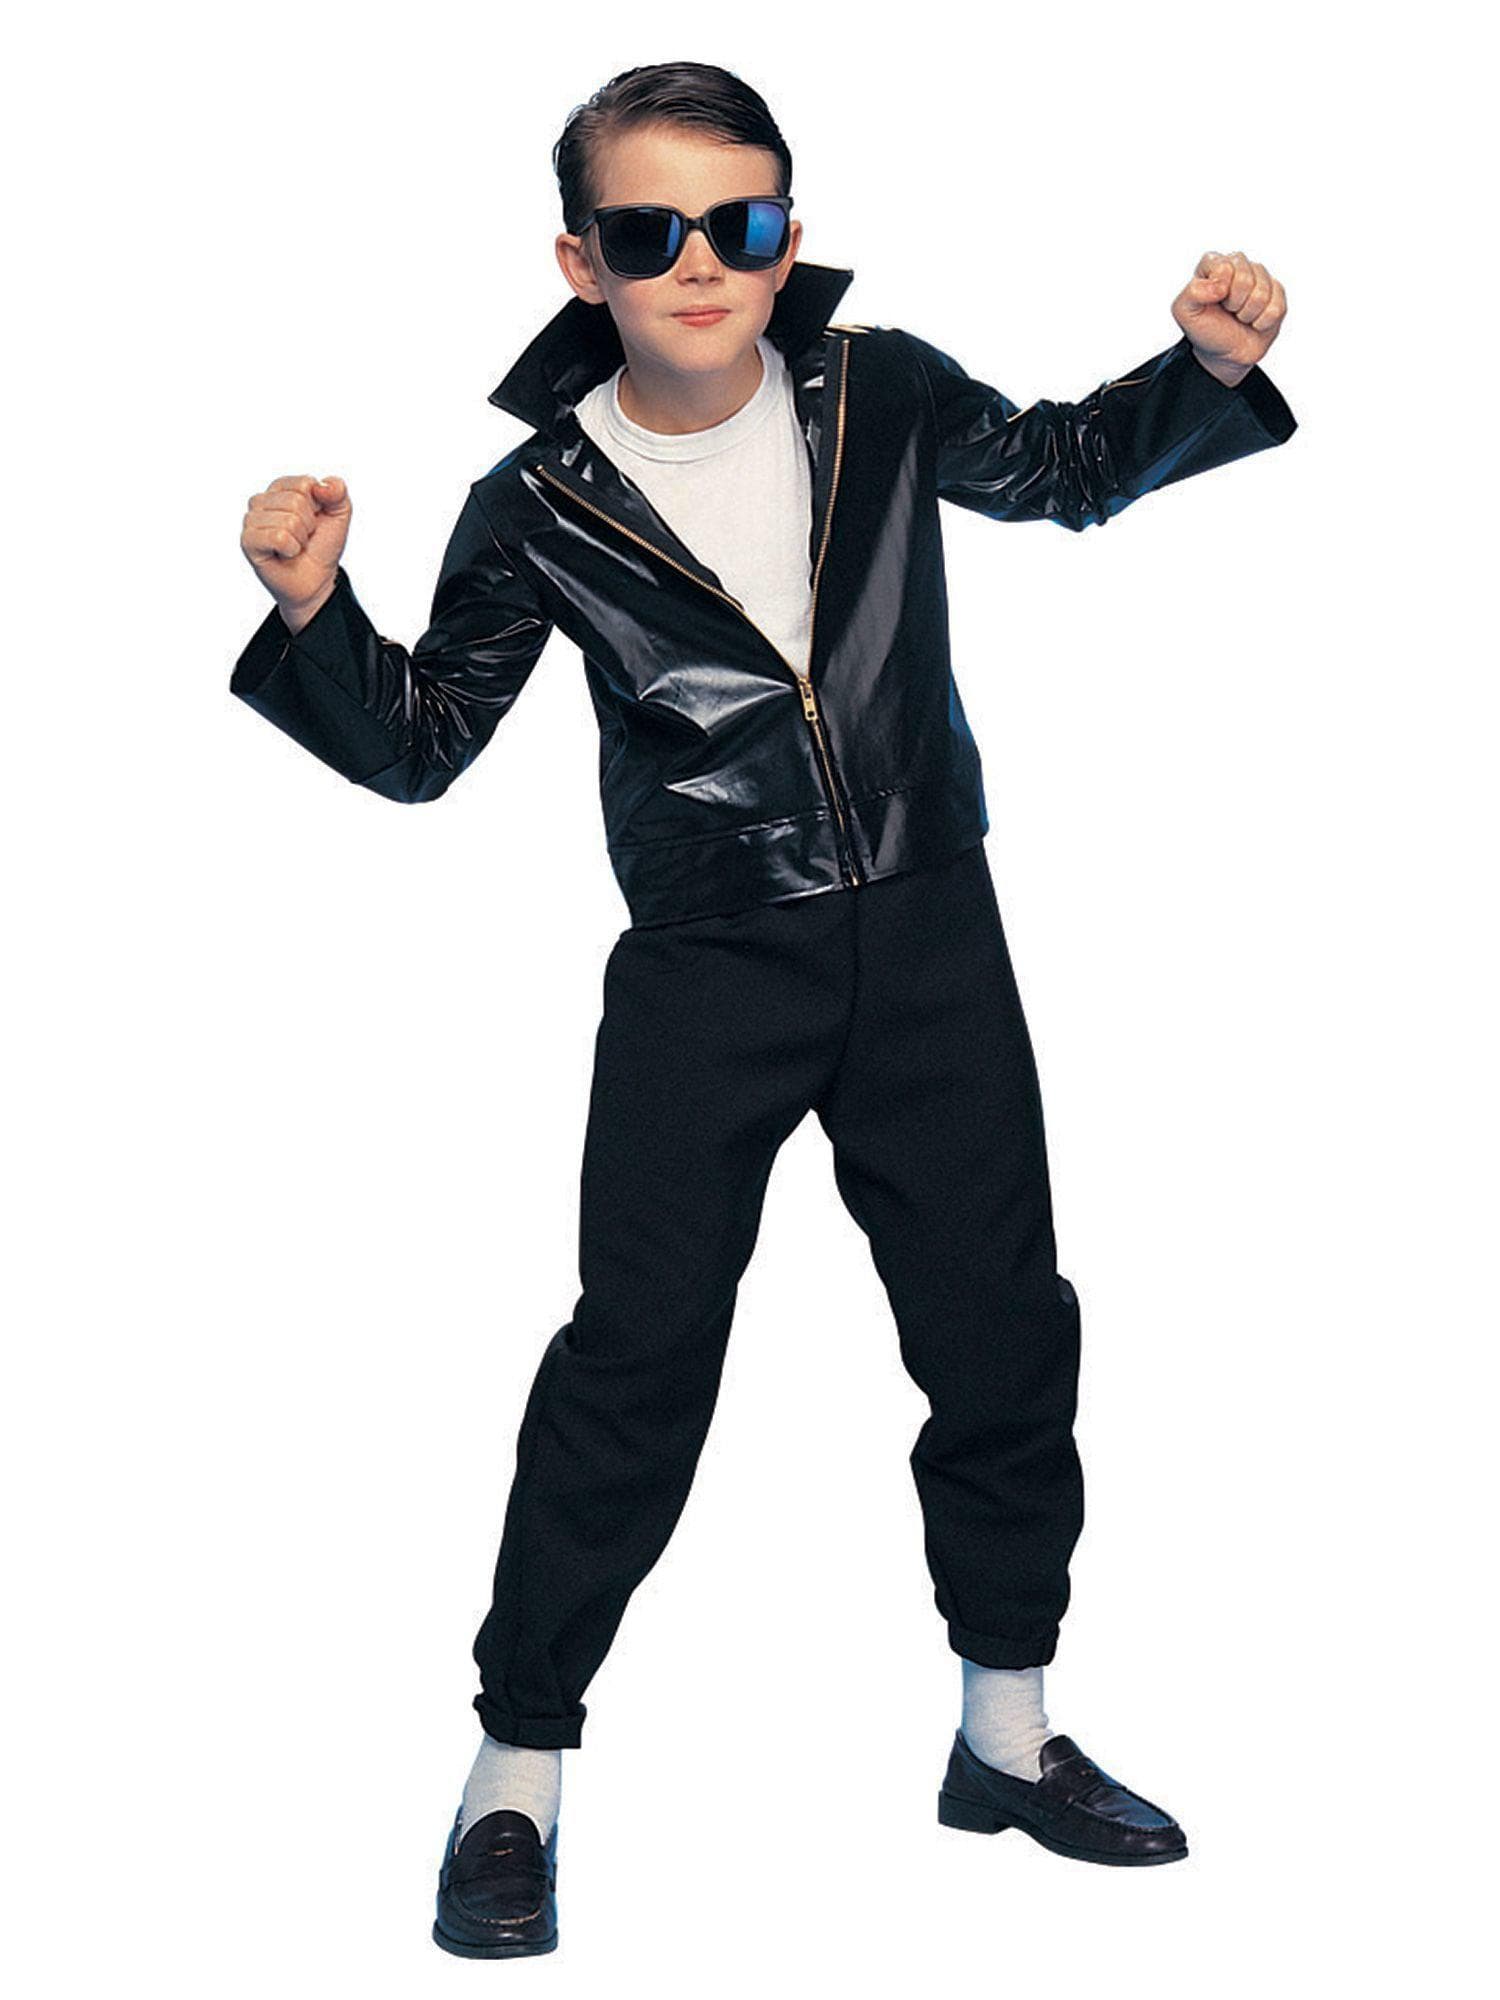 Kid's Grease Costume - costumes.com